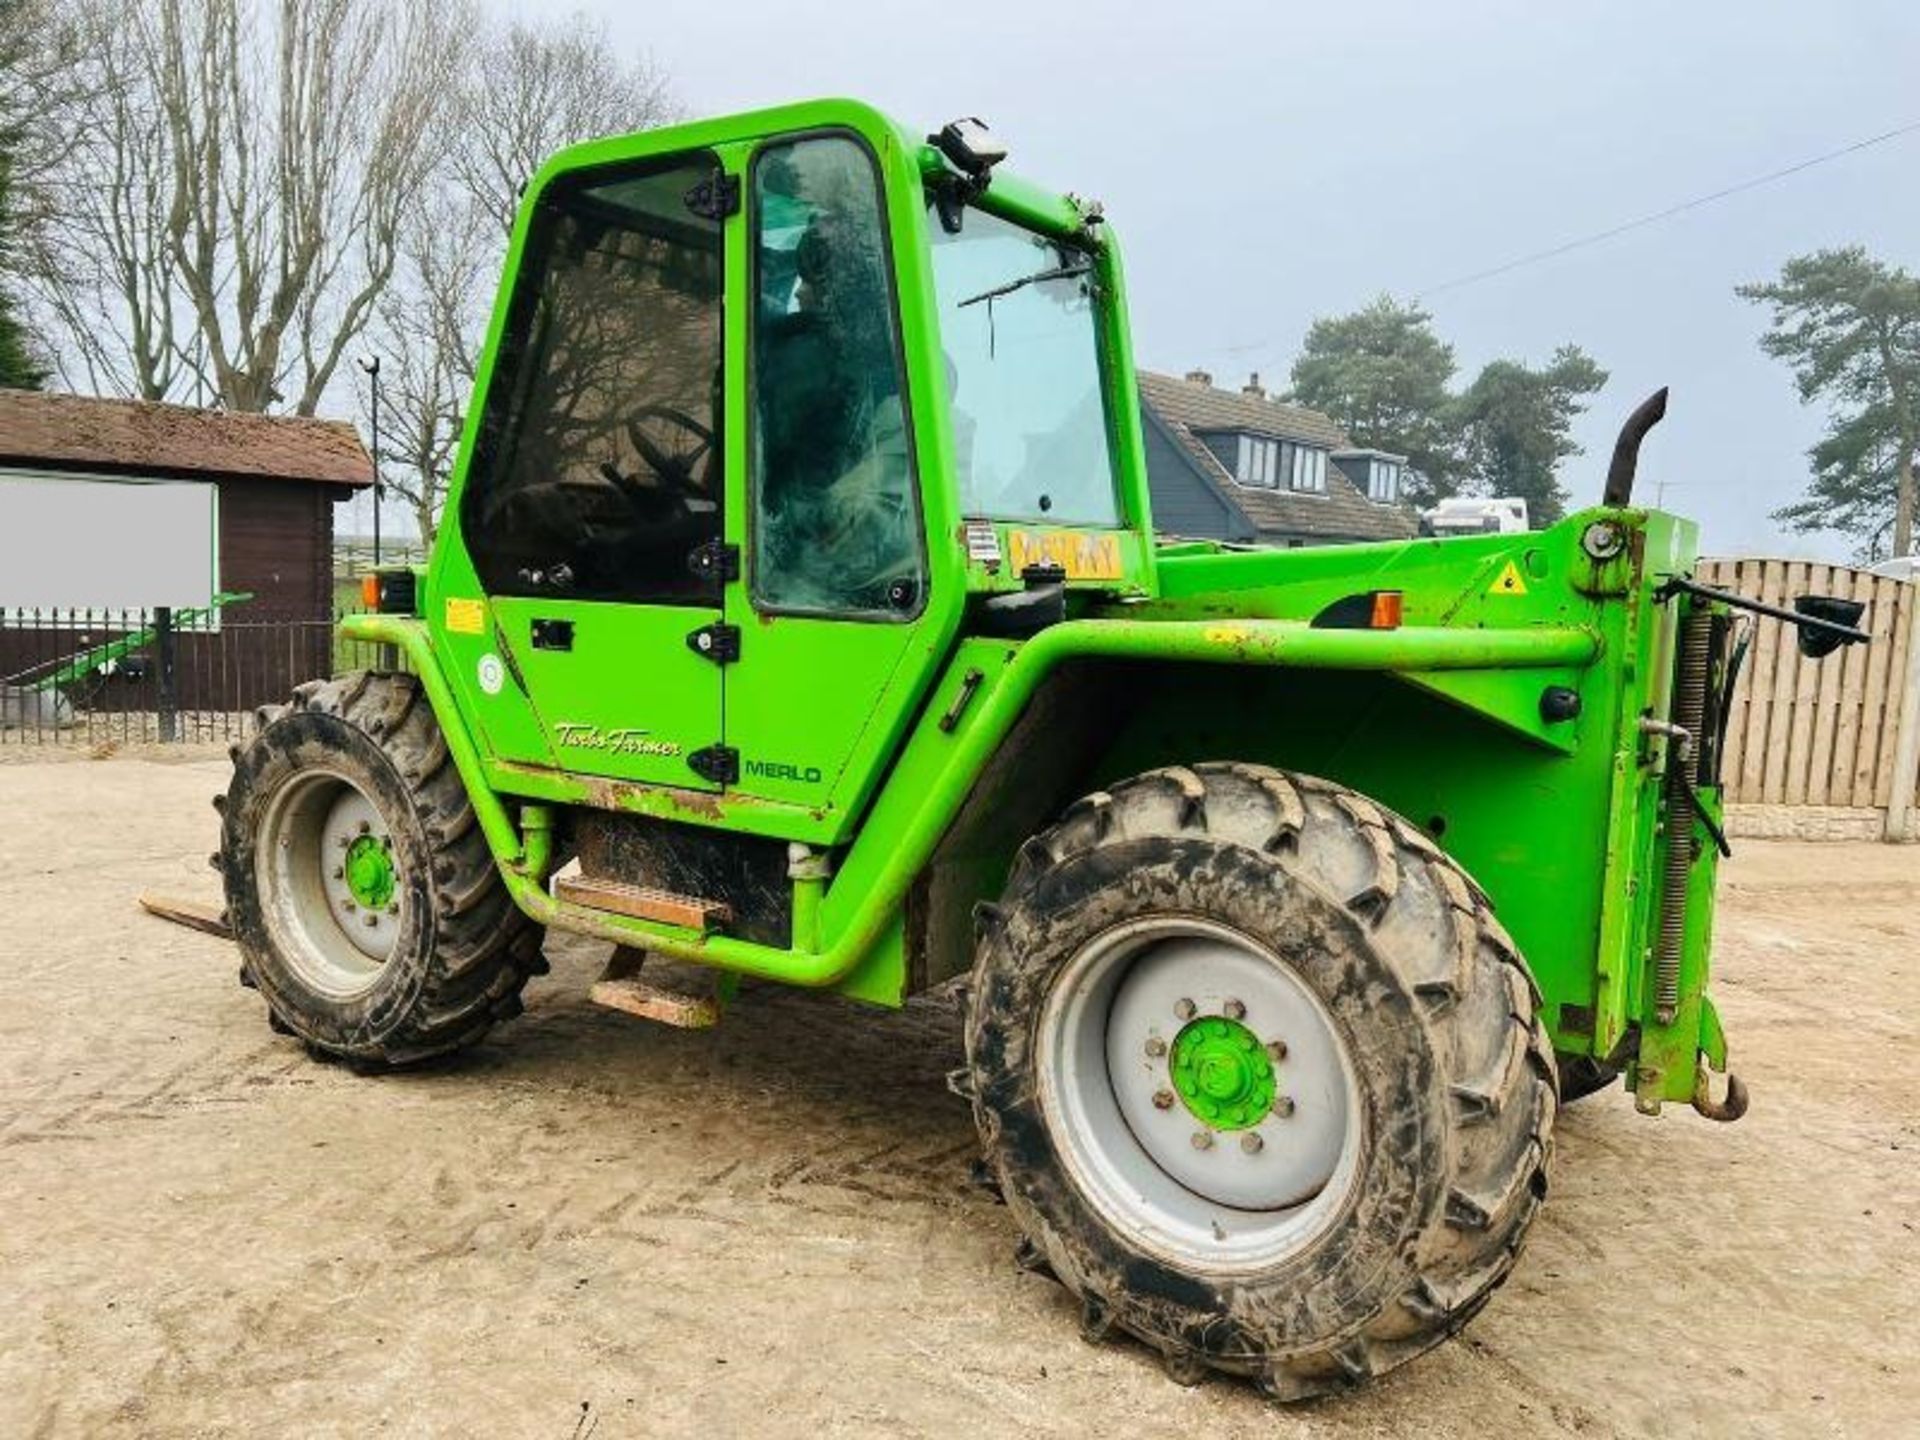 MERLO P32.7 4WD TELEHANDLER * AG-SPEC* C/W PALLET TINES & PICK UP HITCH - Image 6 of 10